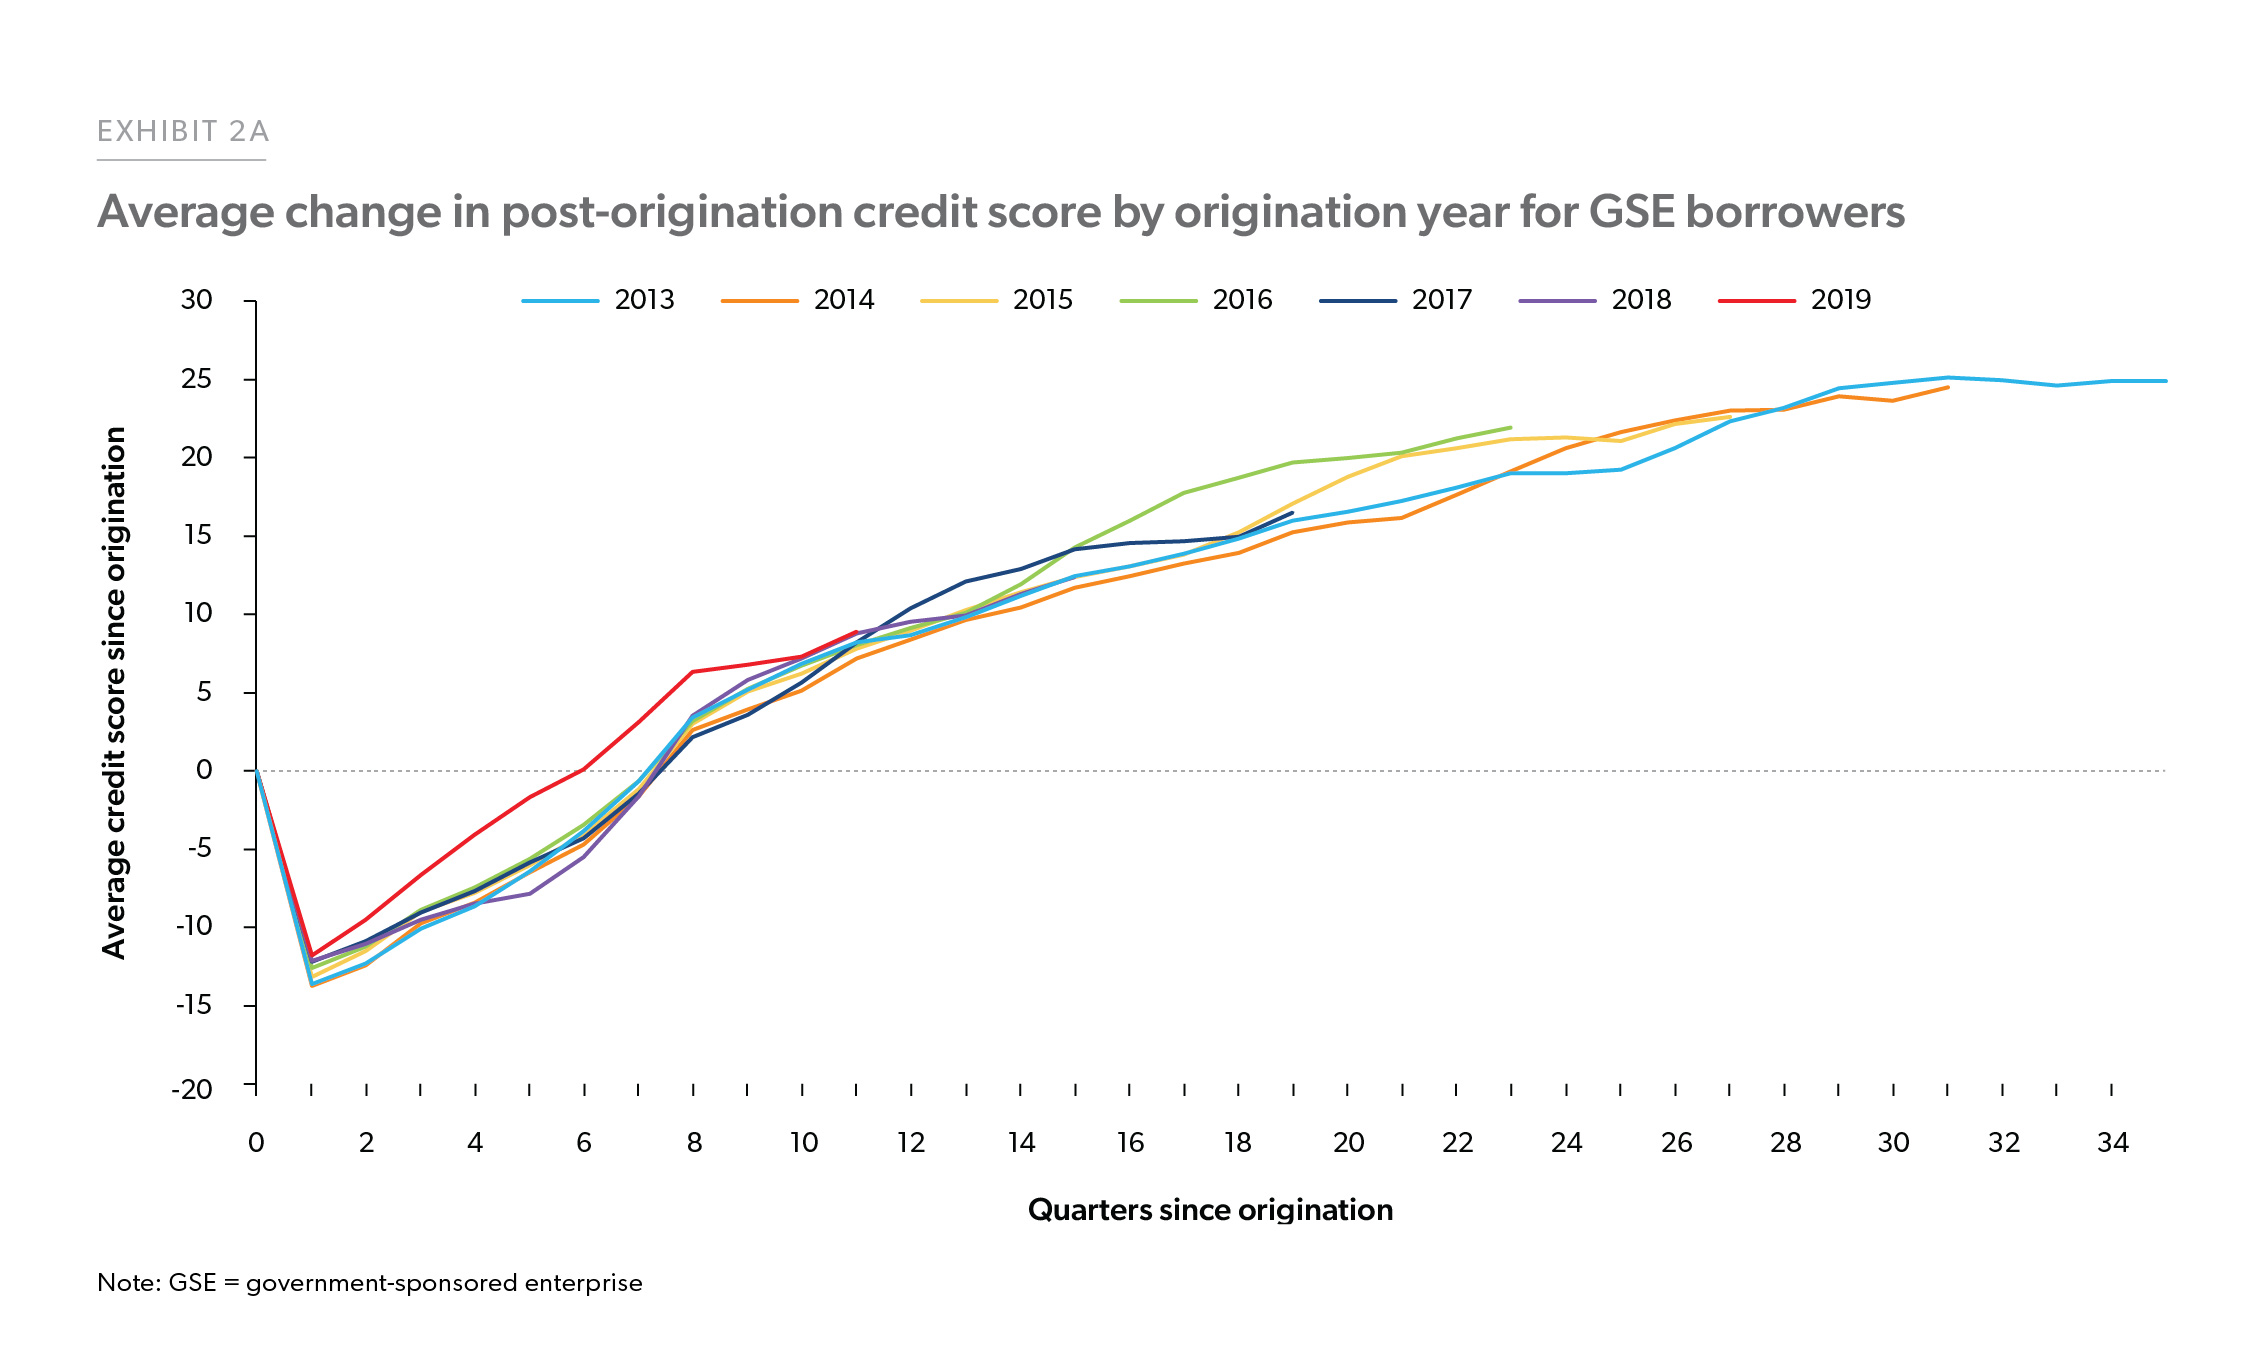 Exhibit 2A: Average change in post-origination credit score by origination year for GSE borrowers